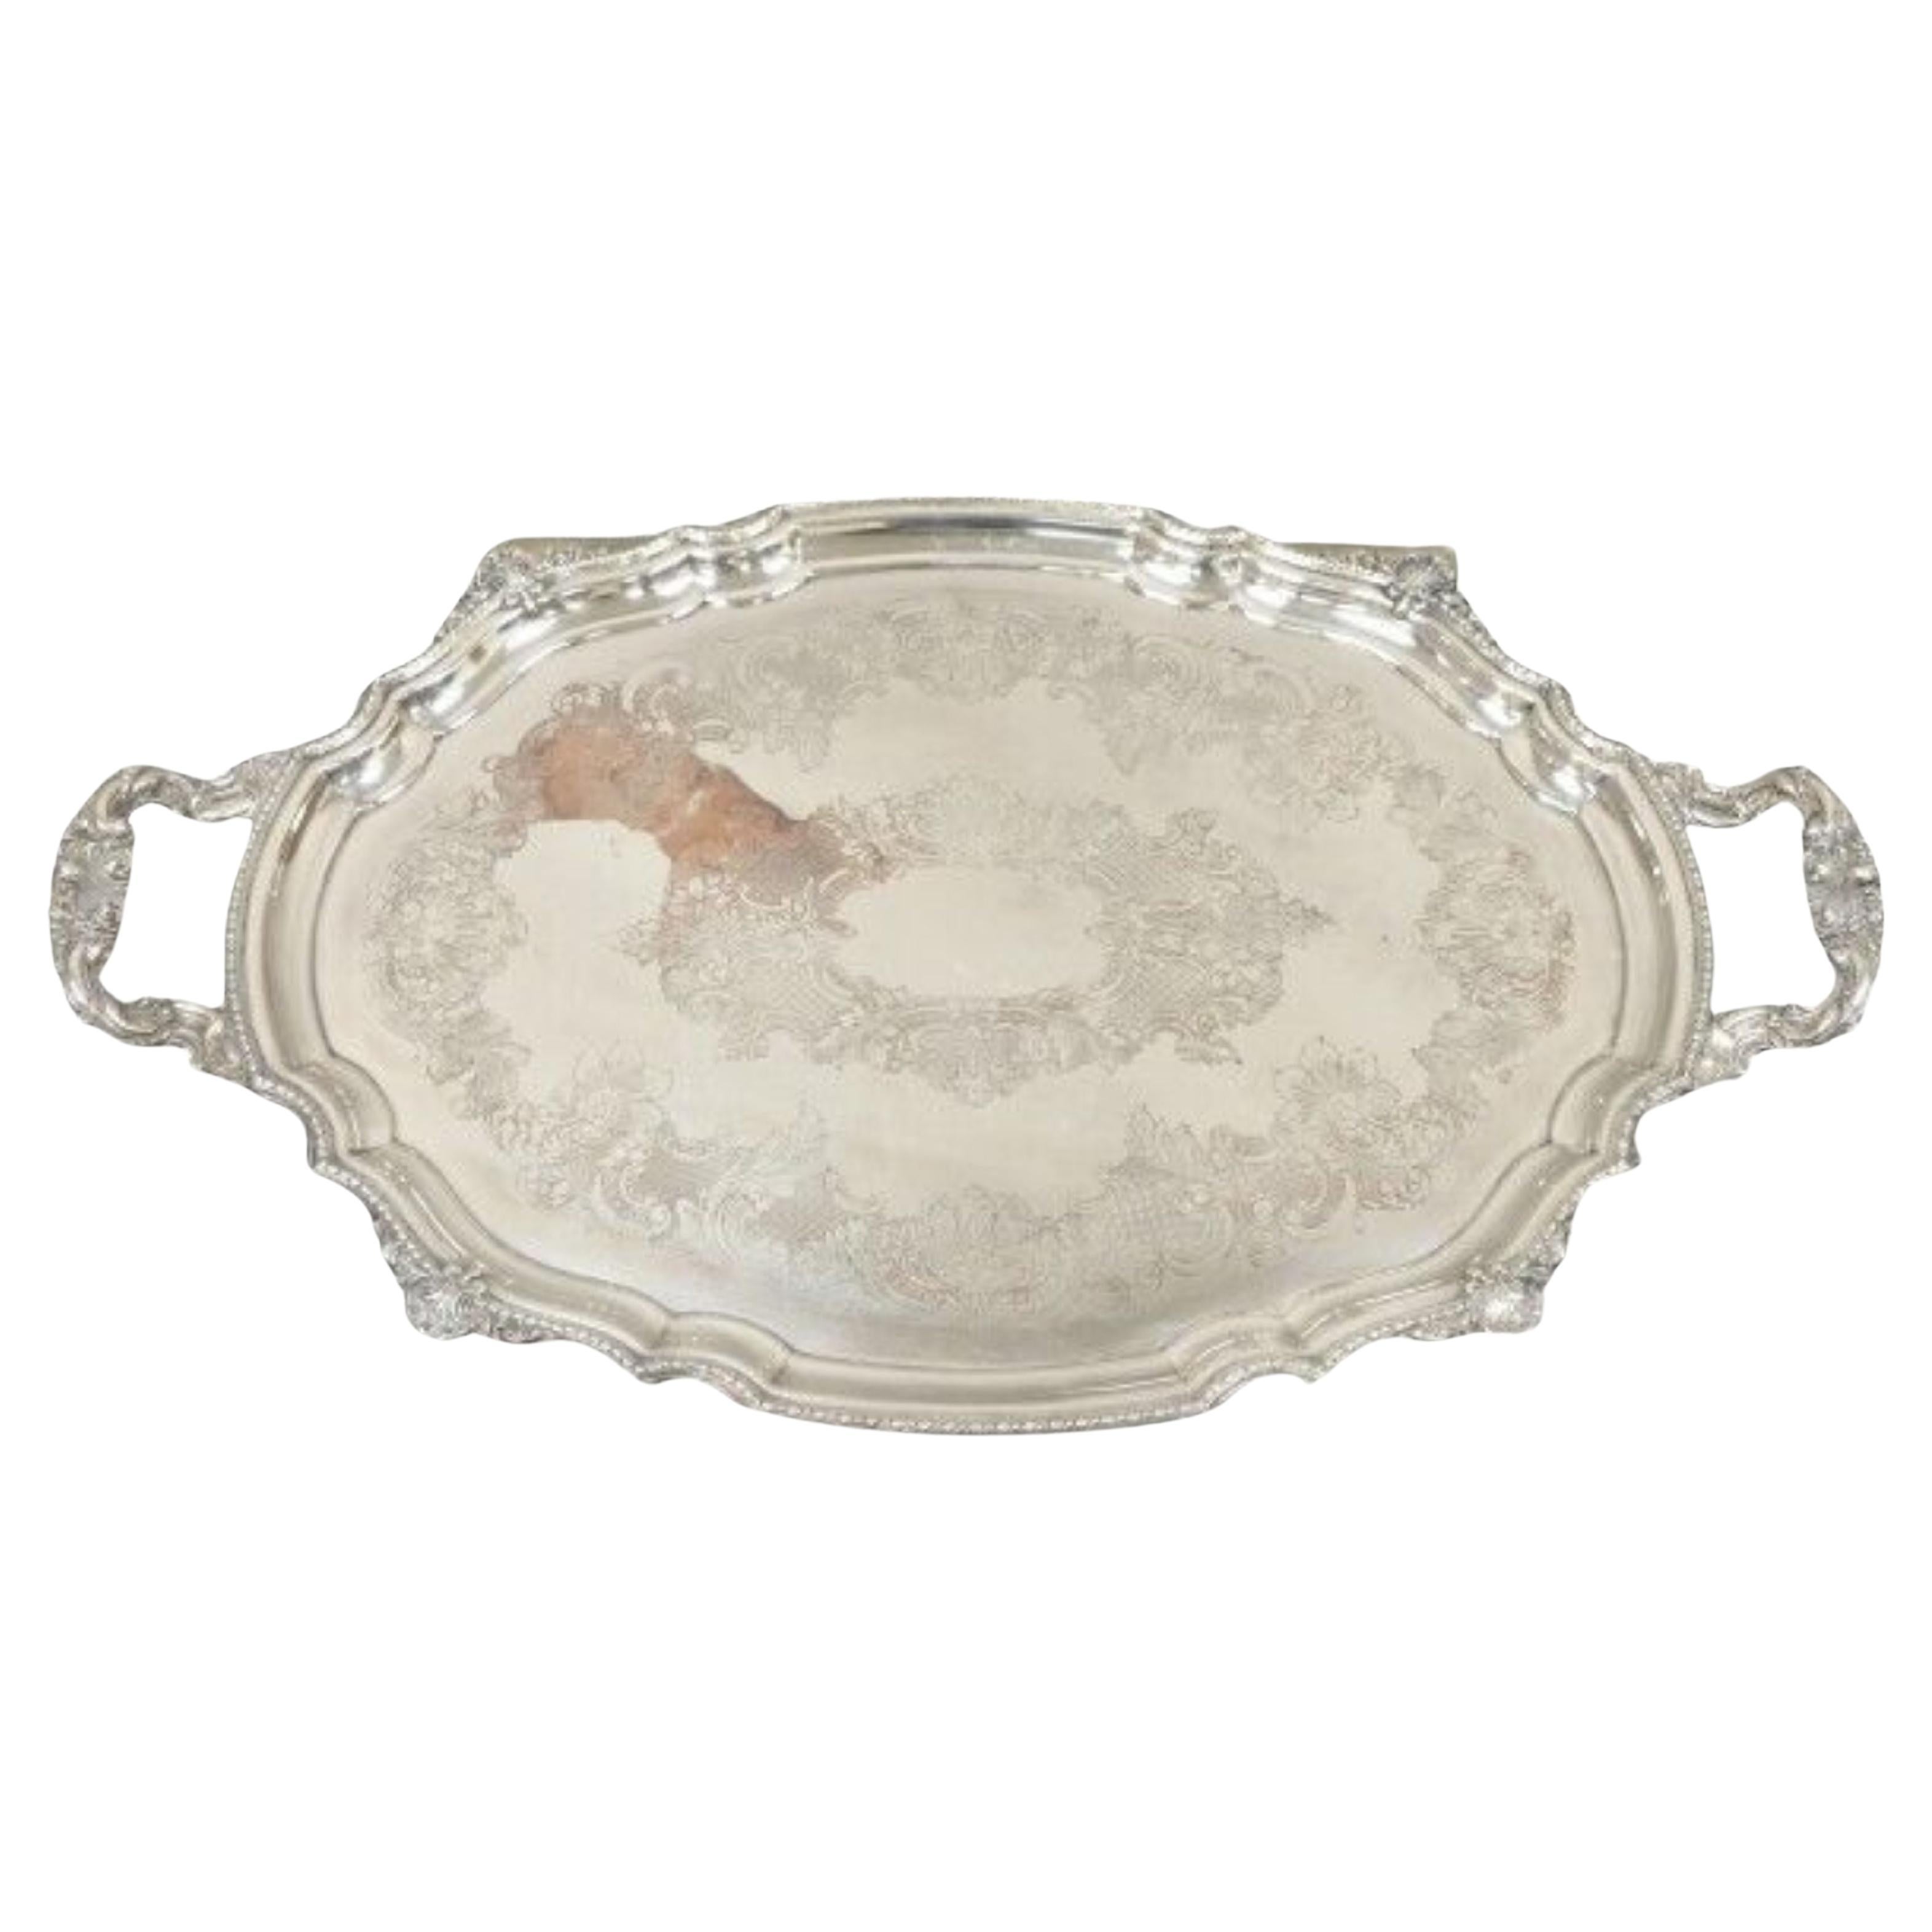 Antique English Victorian Silver Plated Ornate Oval Serving Platter Tray For Sale